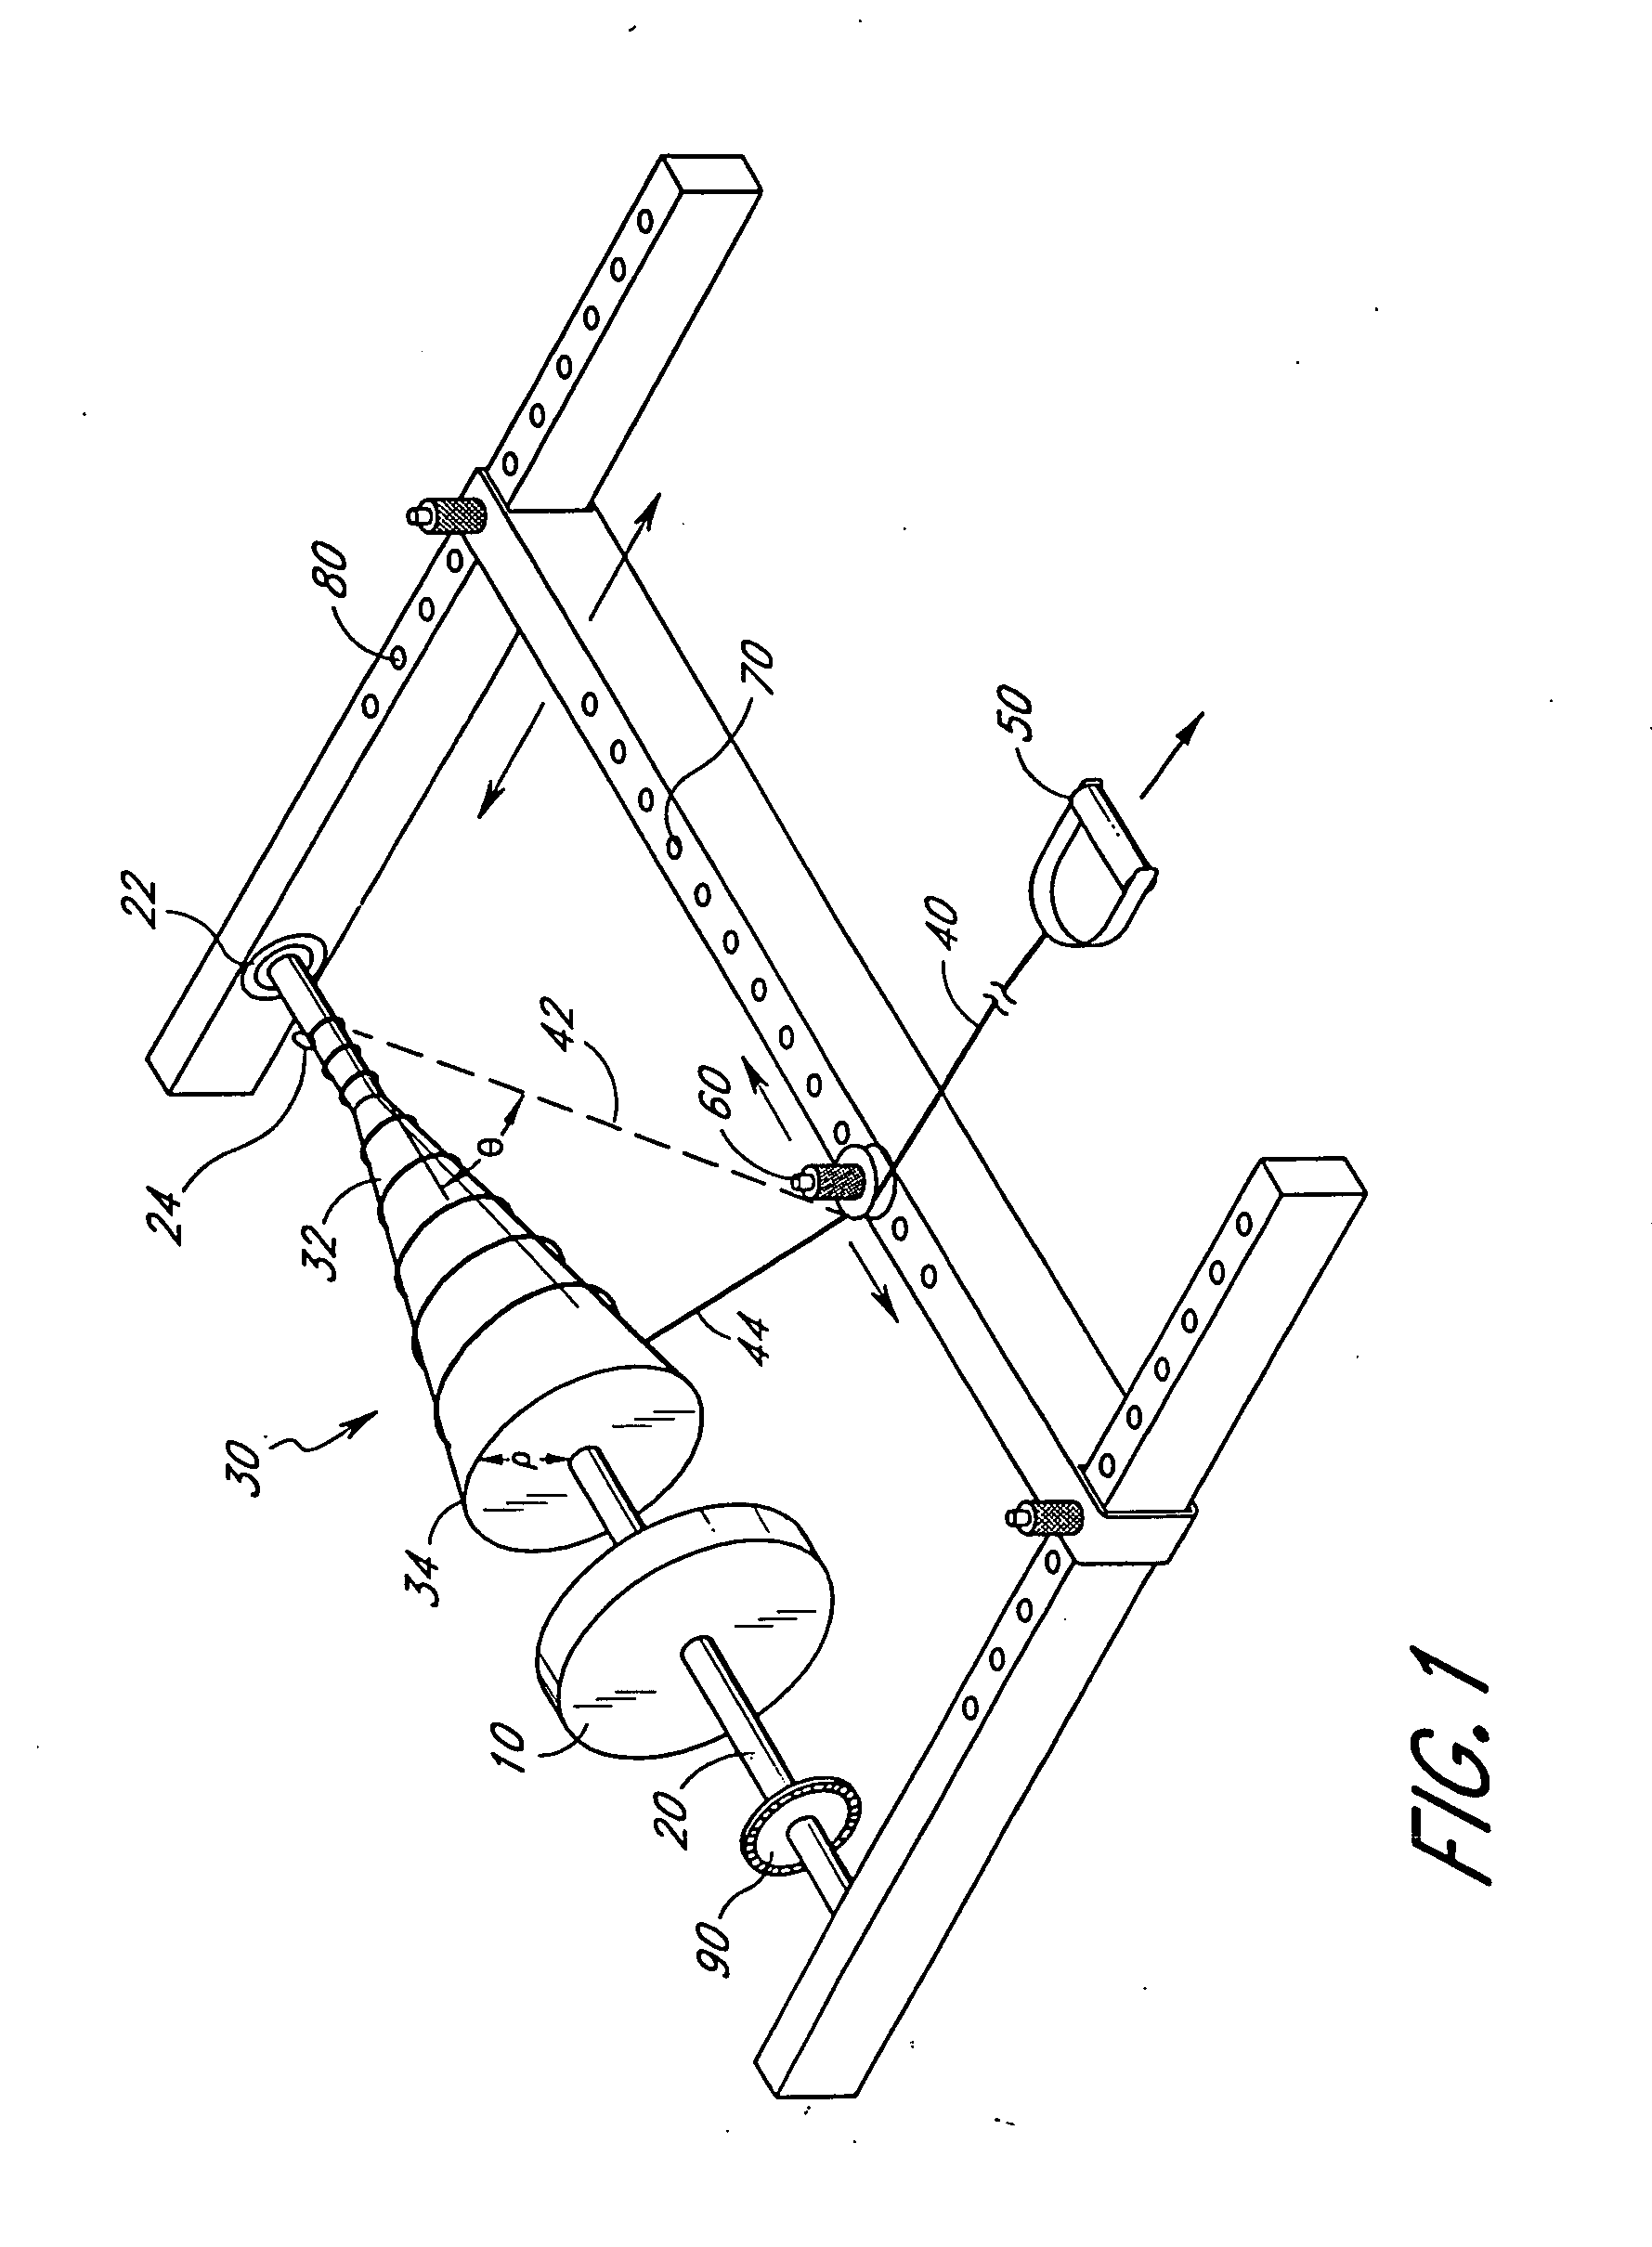 Inertial resistance exercise apparatus and method